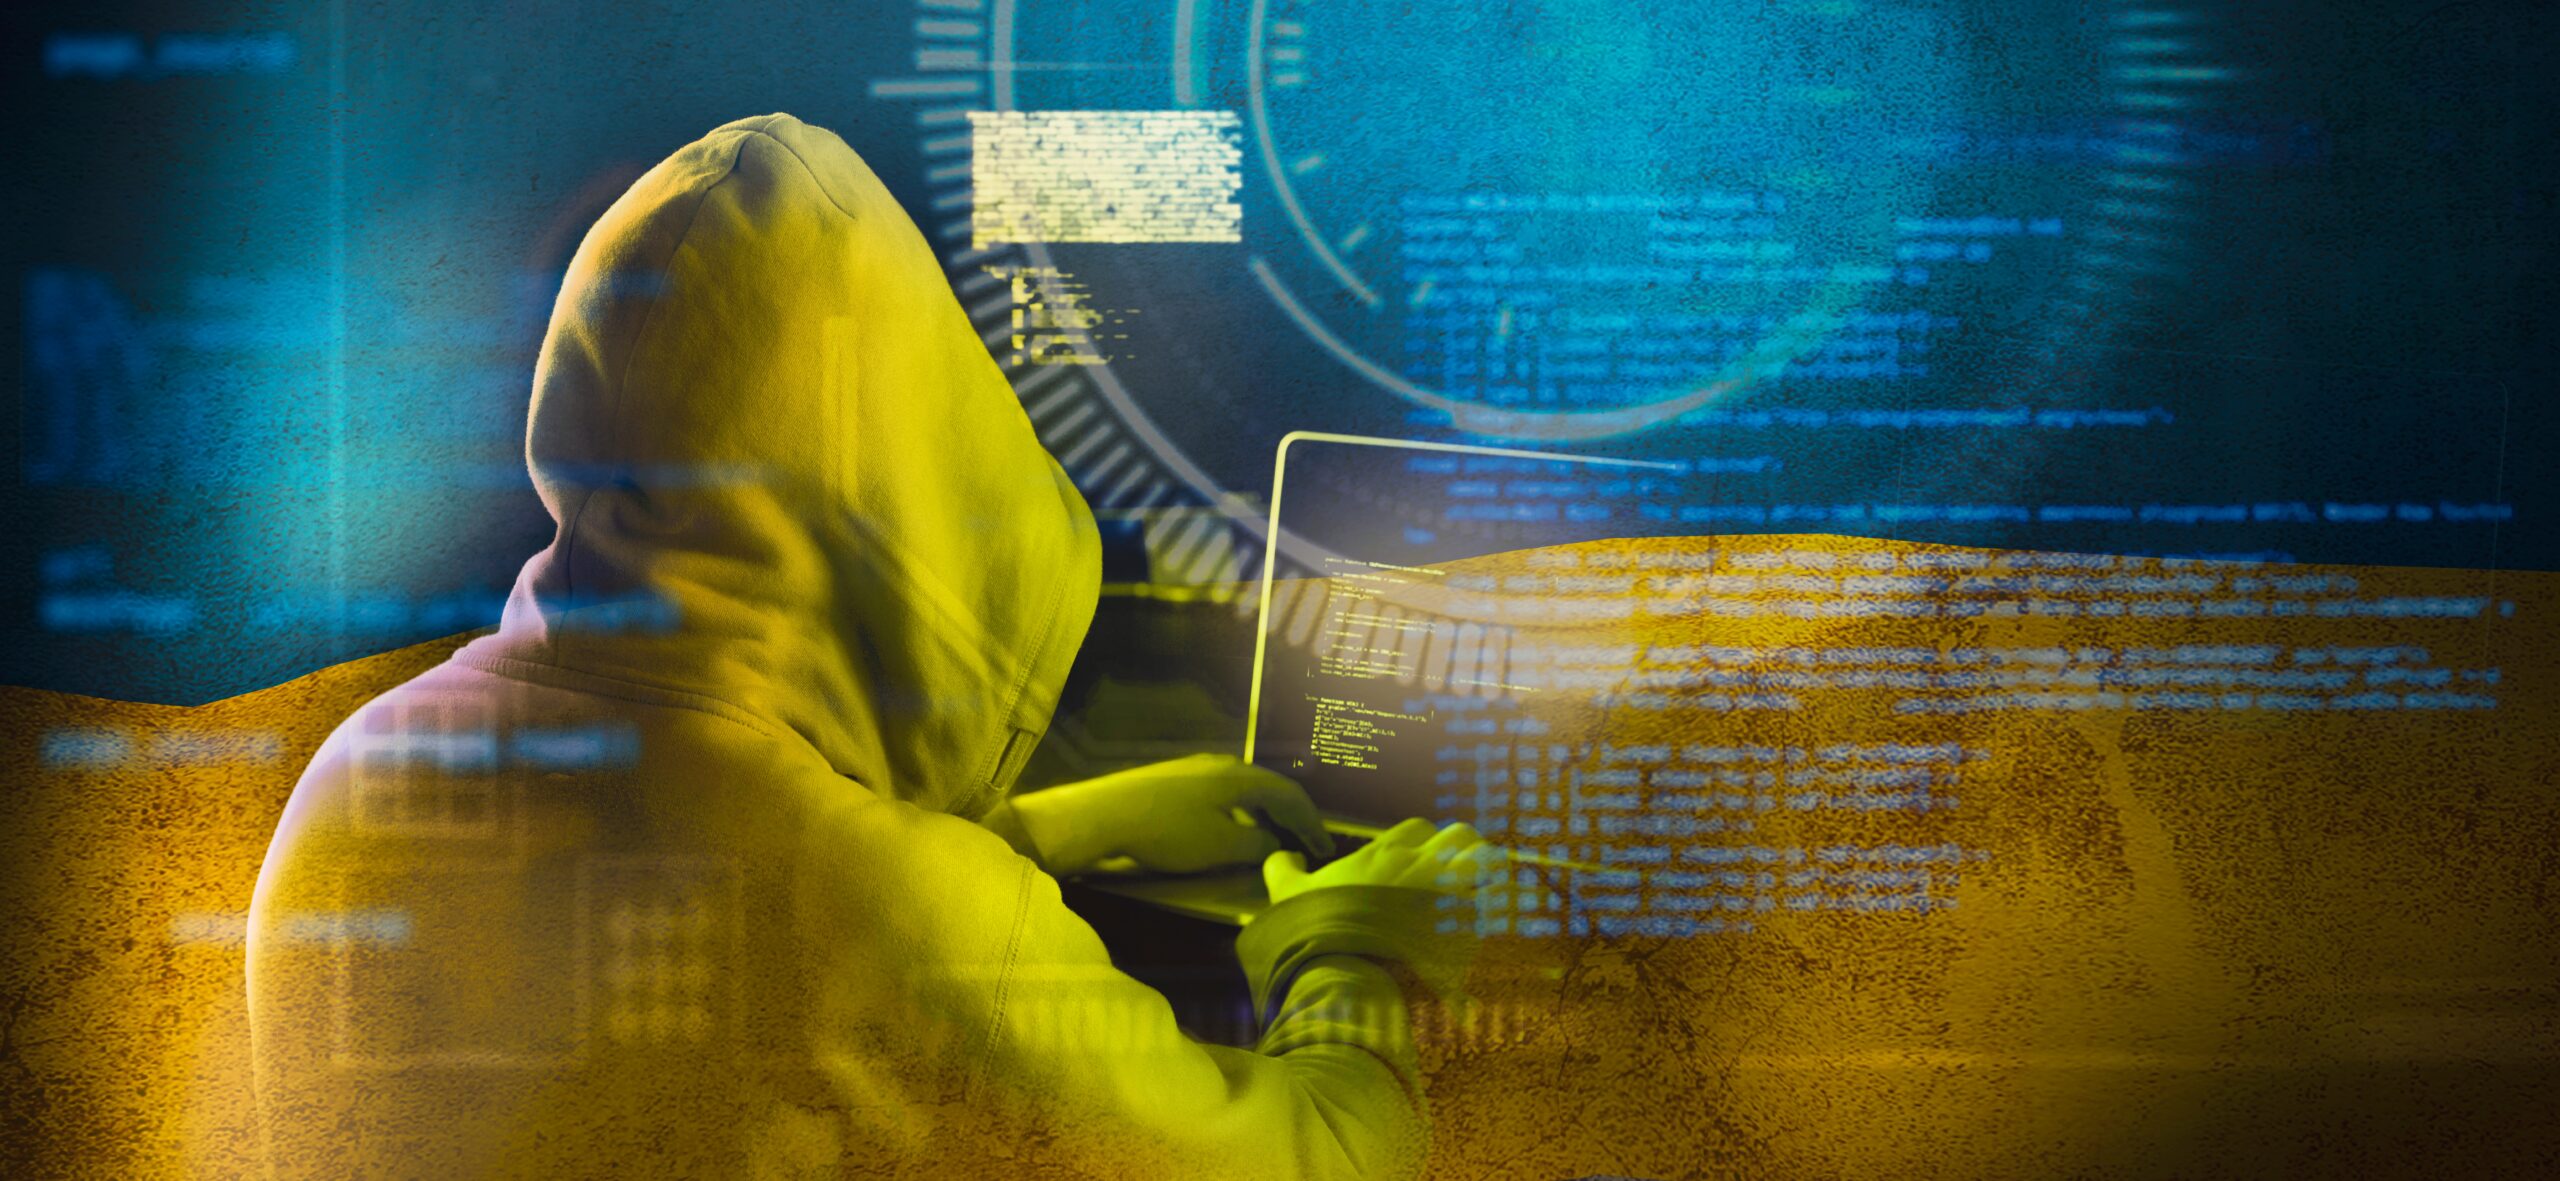 impressionistic image of a hacker in a hoodie, busily attacking a network.